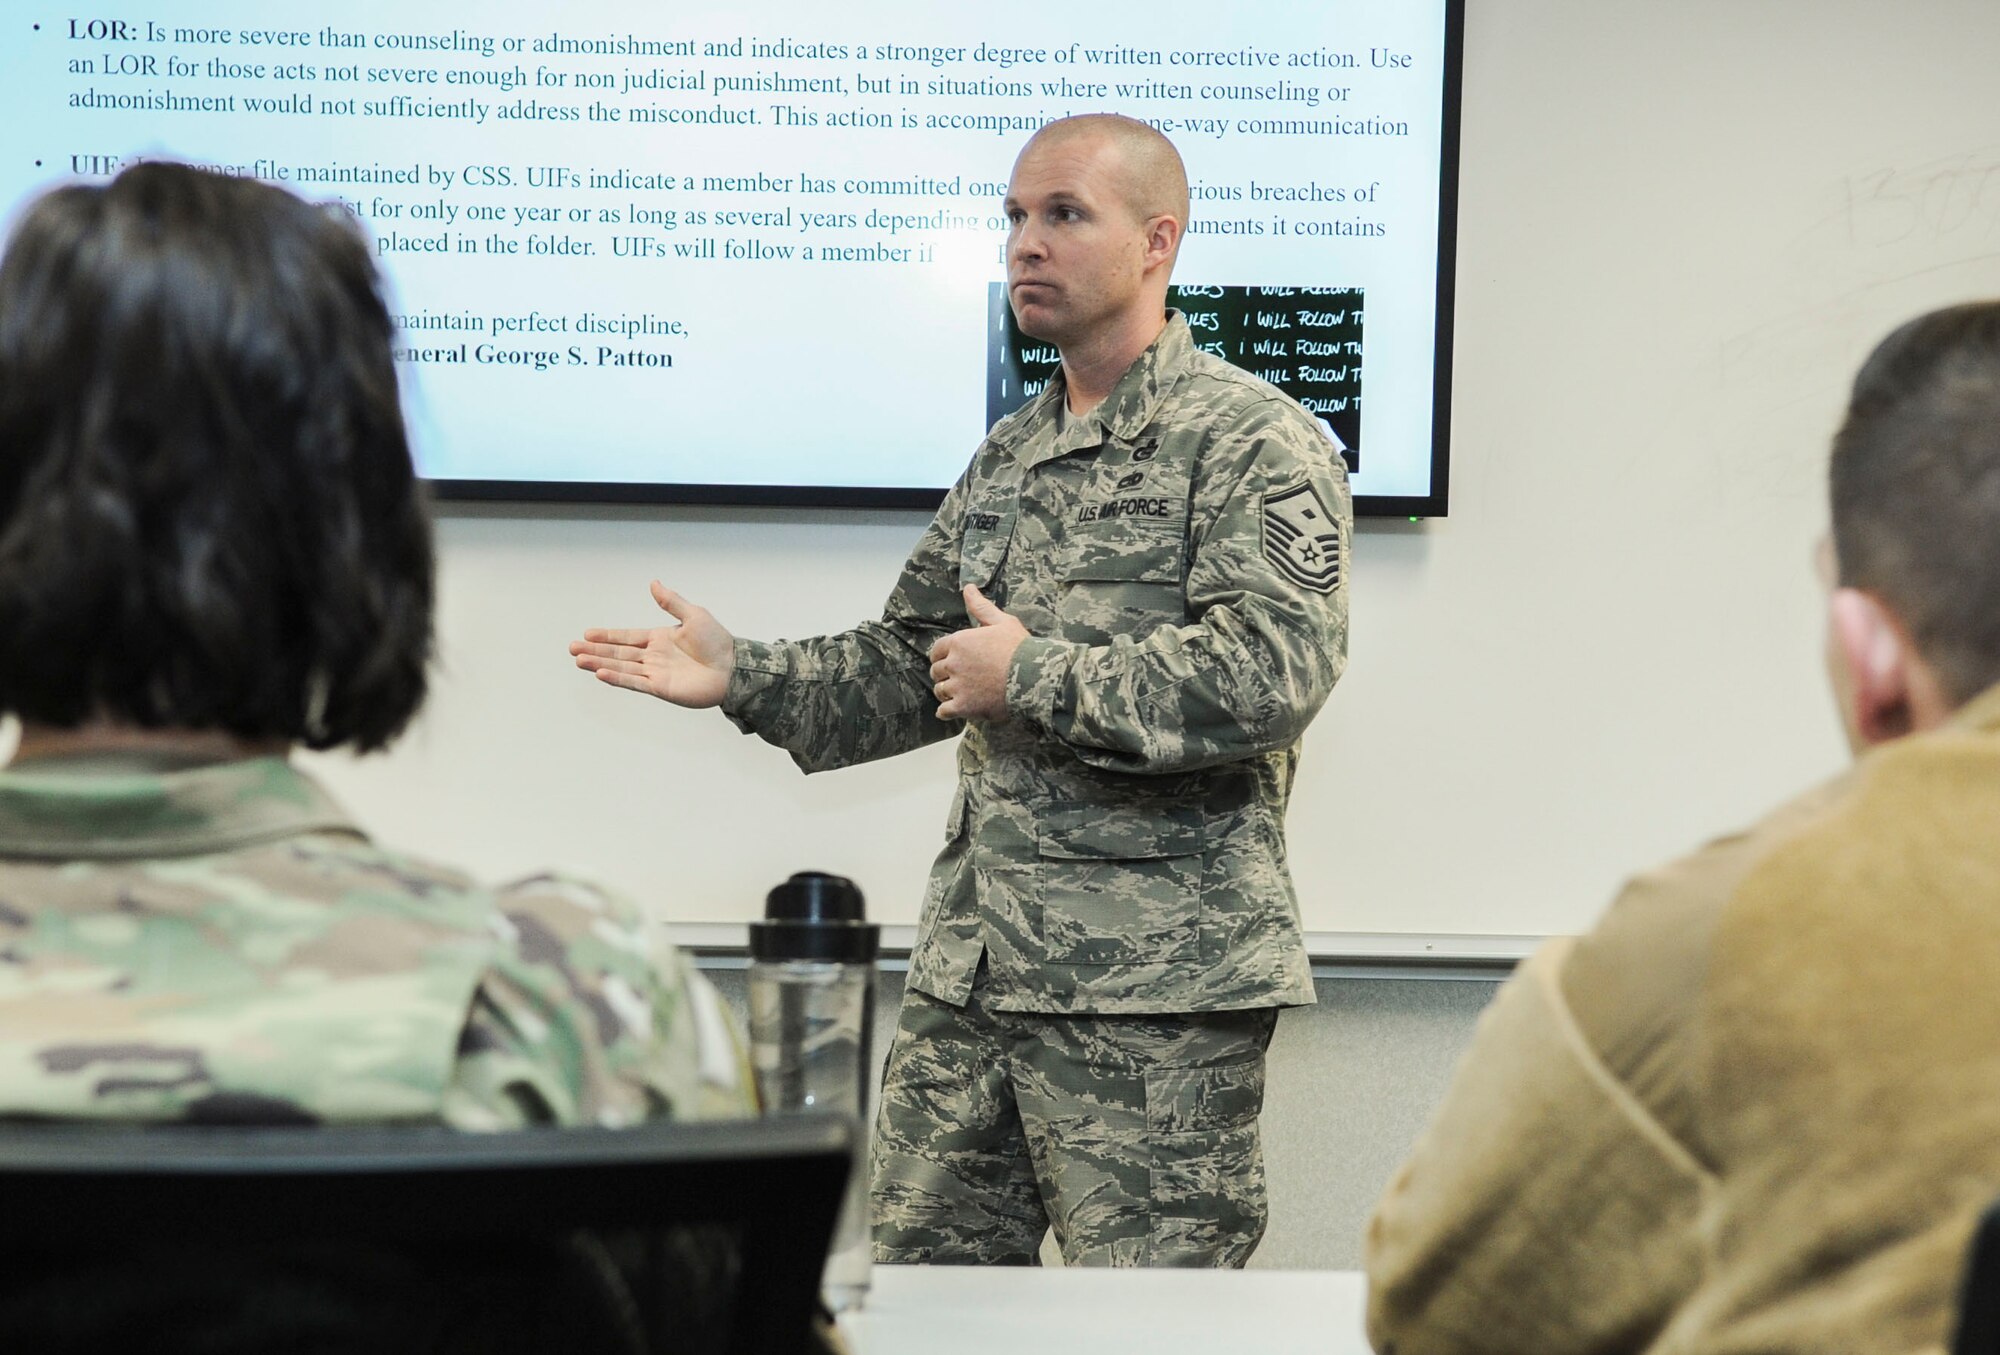 Master Sgt. Brian Frutiger, Geospatial and Signatures Intelligence Group first sergeant, describes procedures for administering Letters of Counselling during a First Sergeant’s Panel on the progressive discipline model at Wright-Patterson Air Force Base, Ohio, Dec. 11, 2019. The panel provided first sergeants from a variety of squadrons with an avenue to share their experience concerning progressive discipline and best practices for leading and mentoring subordinates. (U.S. Air Force photo by Staff Sgt. Seth Stang)